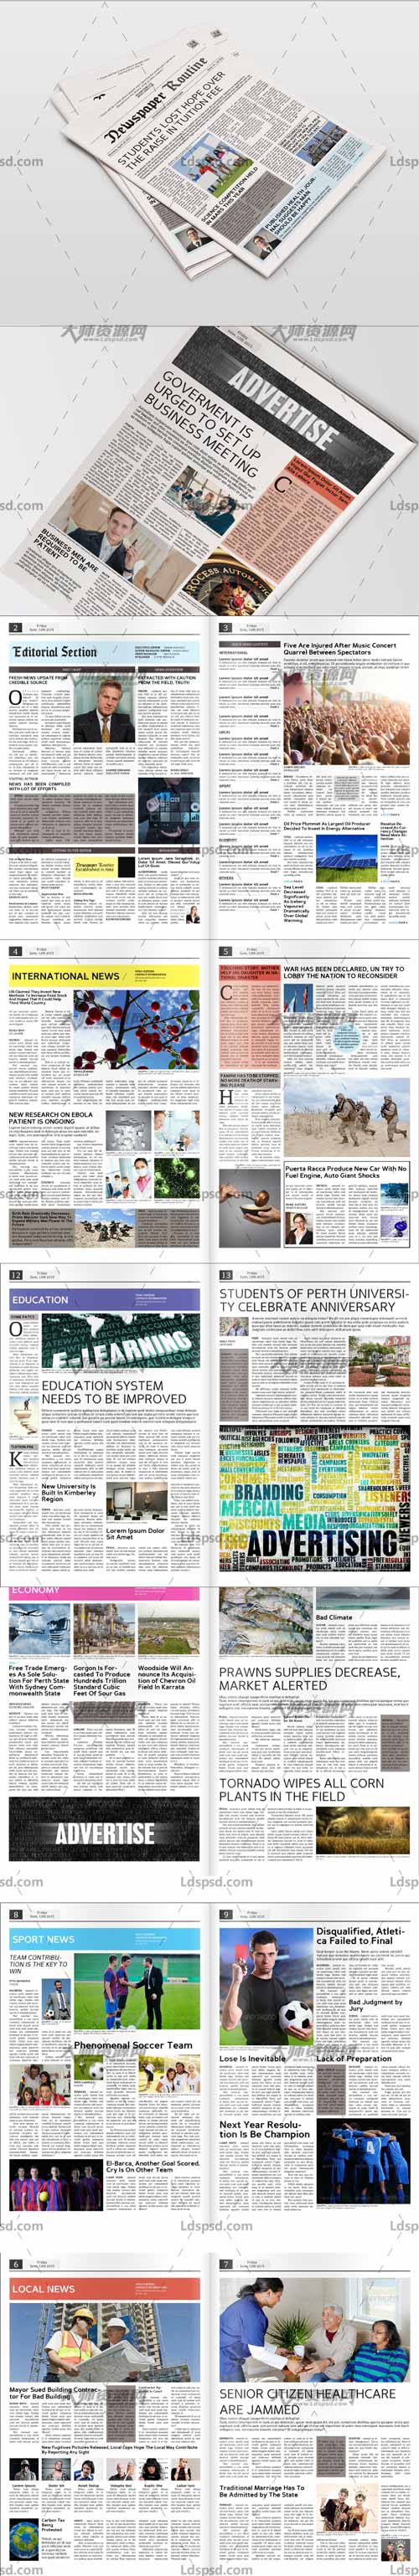 Newspaper Template 14 Pages,indesign模板－报纸报刊(14页)